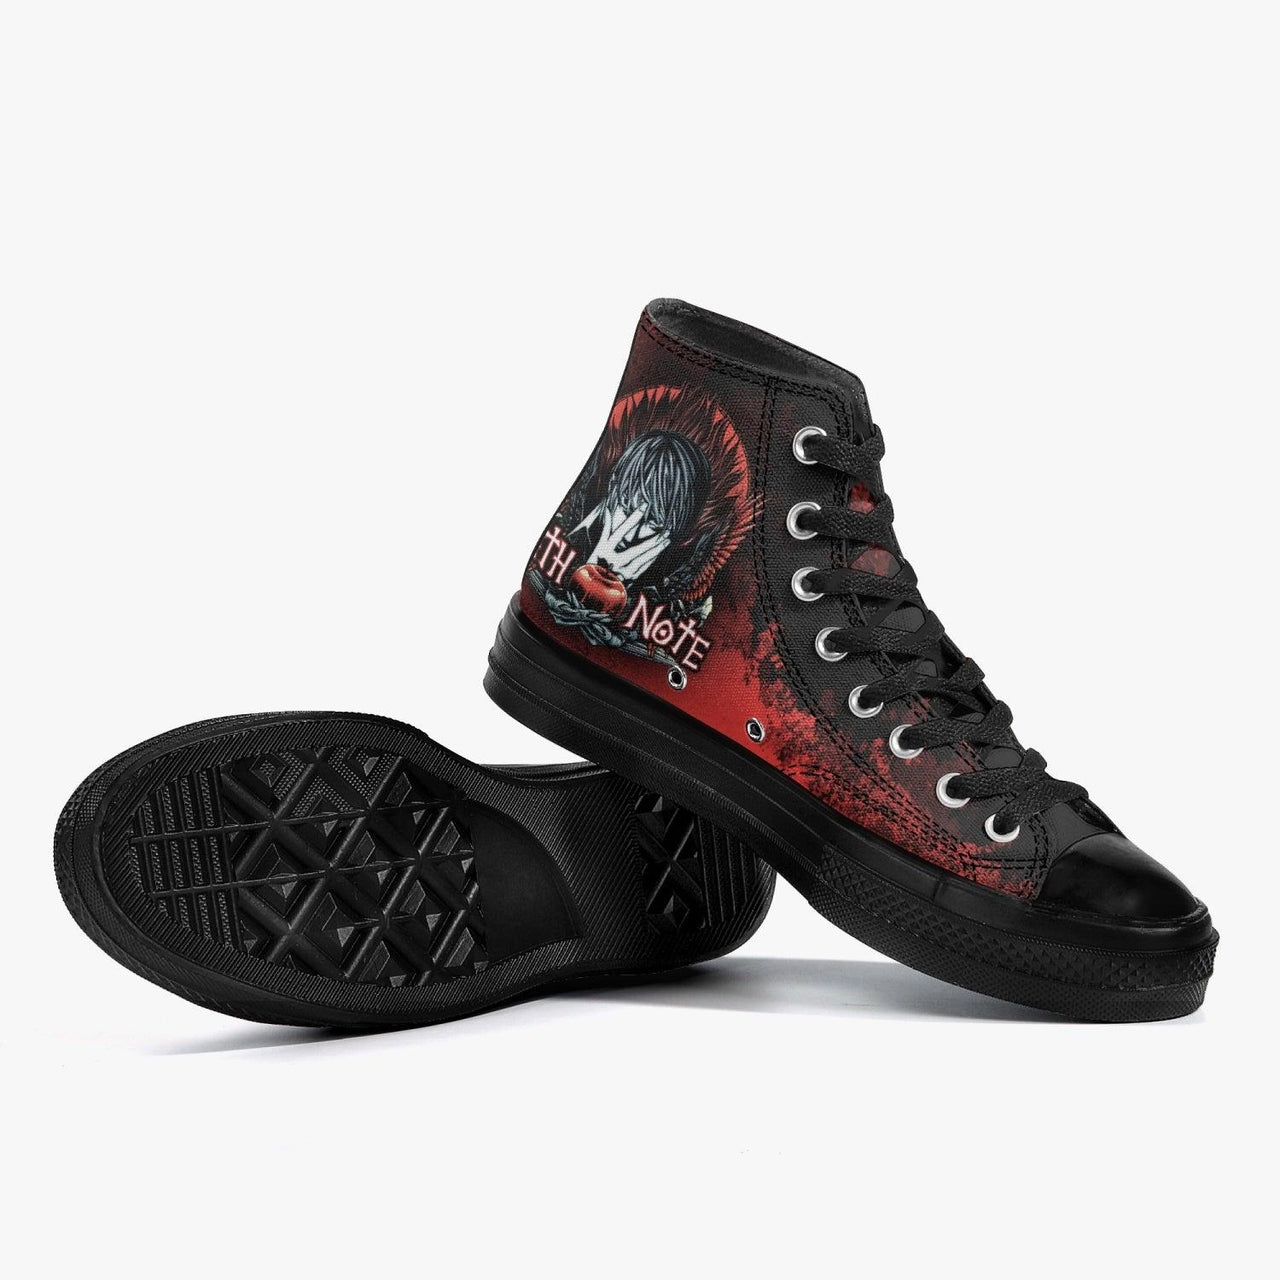 Death Note Red/Black A-Star High Anime Shoes _ Death Note _ Ayuko